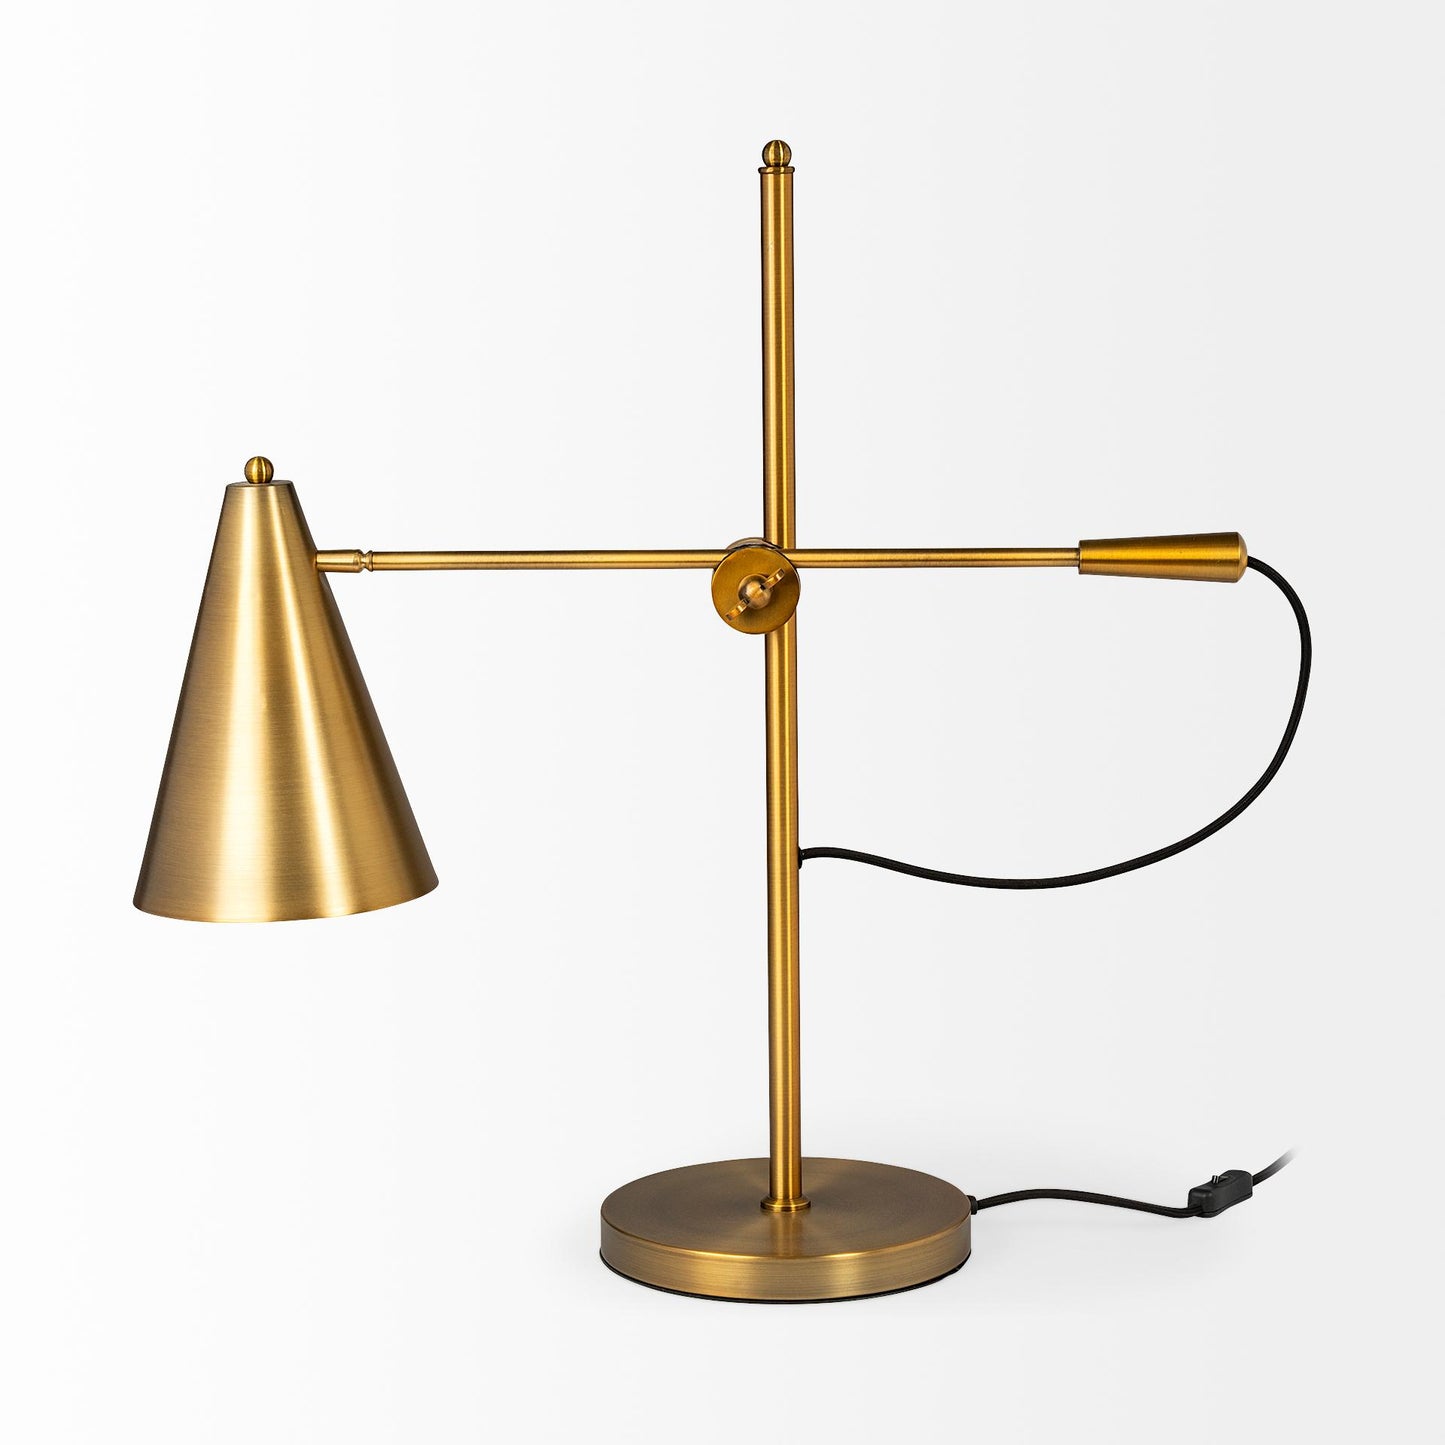 Fragon I (26"H) Gold-Tone Metal Adjustable Cone Shade Table Lamp